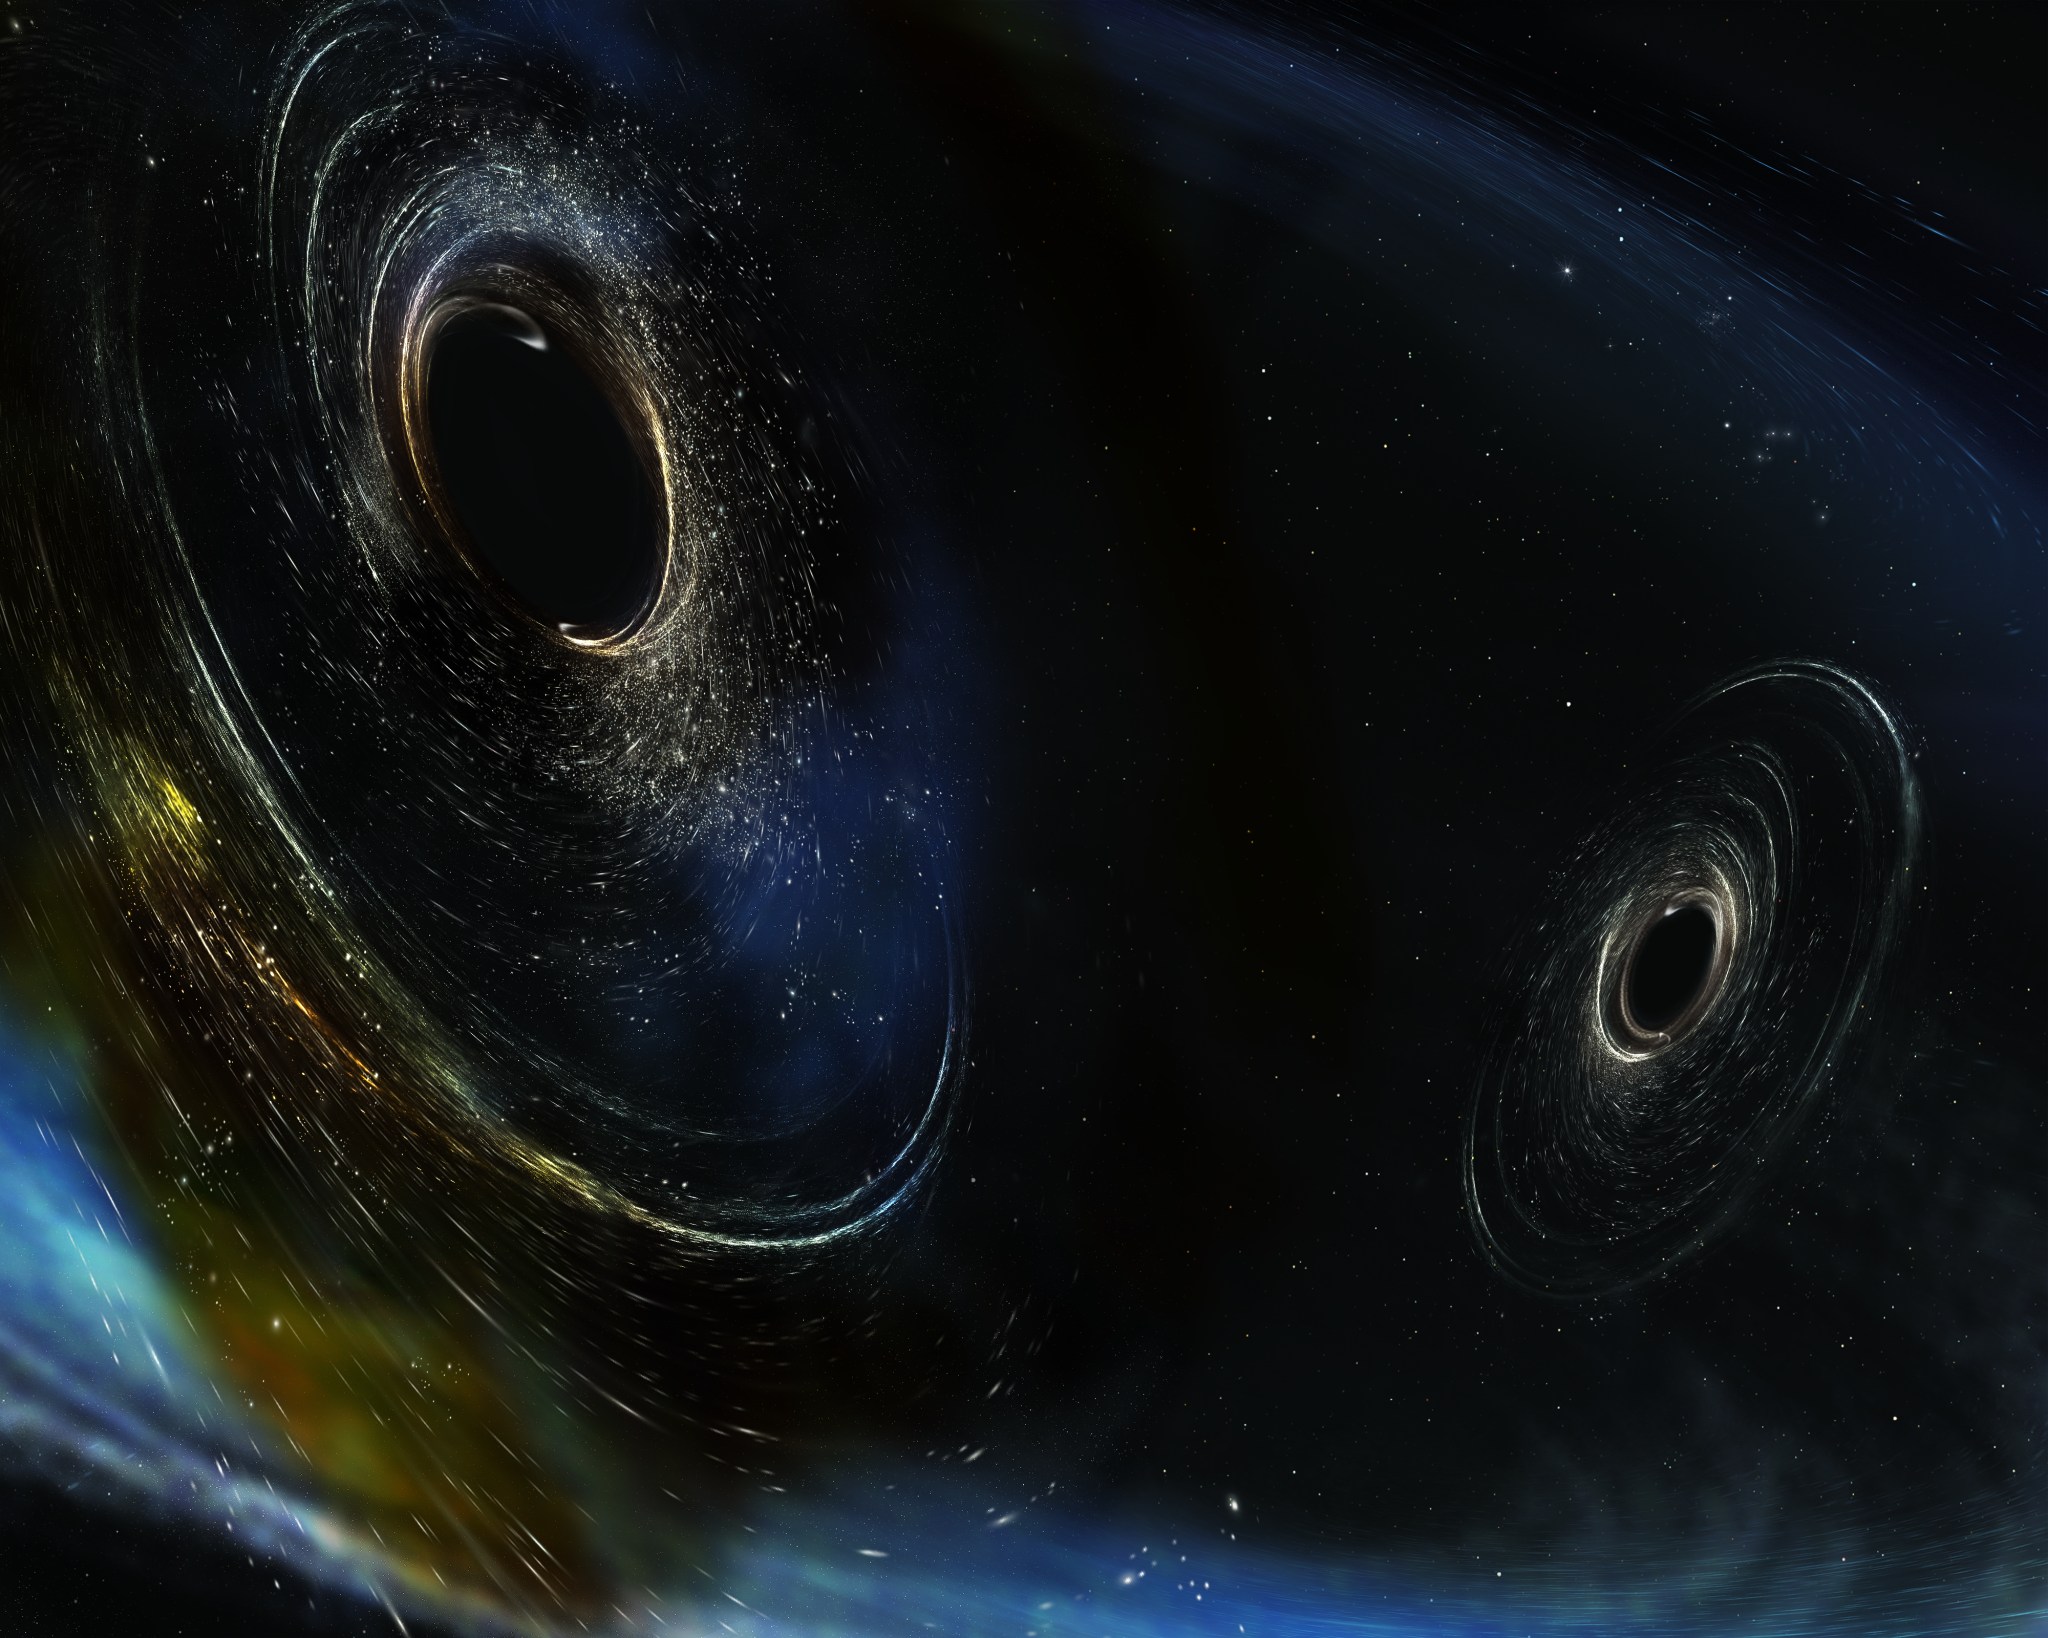 Two merging black holes (upper right and lower left) appear against a starry backdrop. Light arcs suggest their accretion disks.